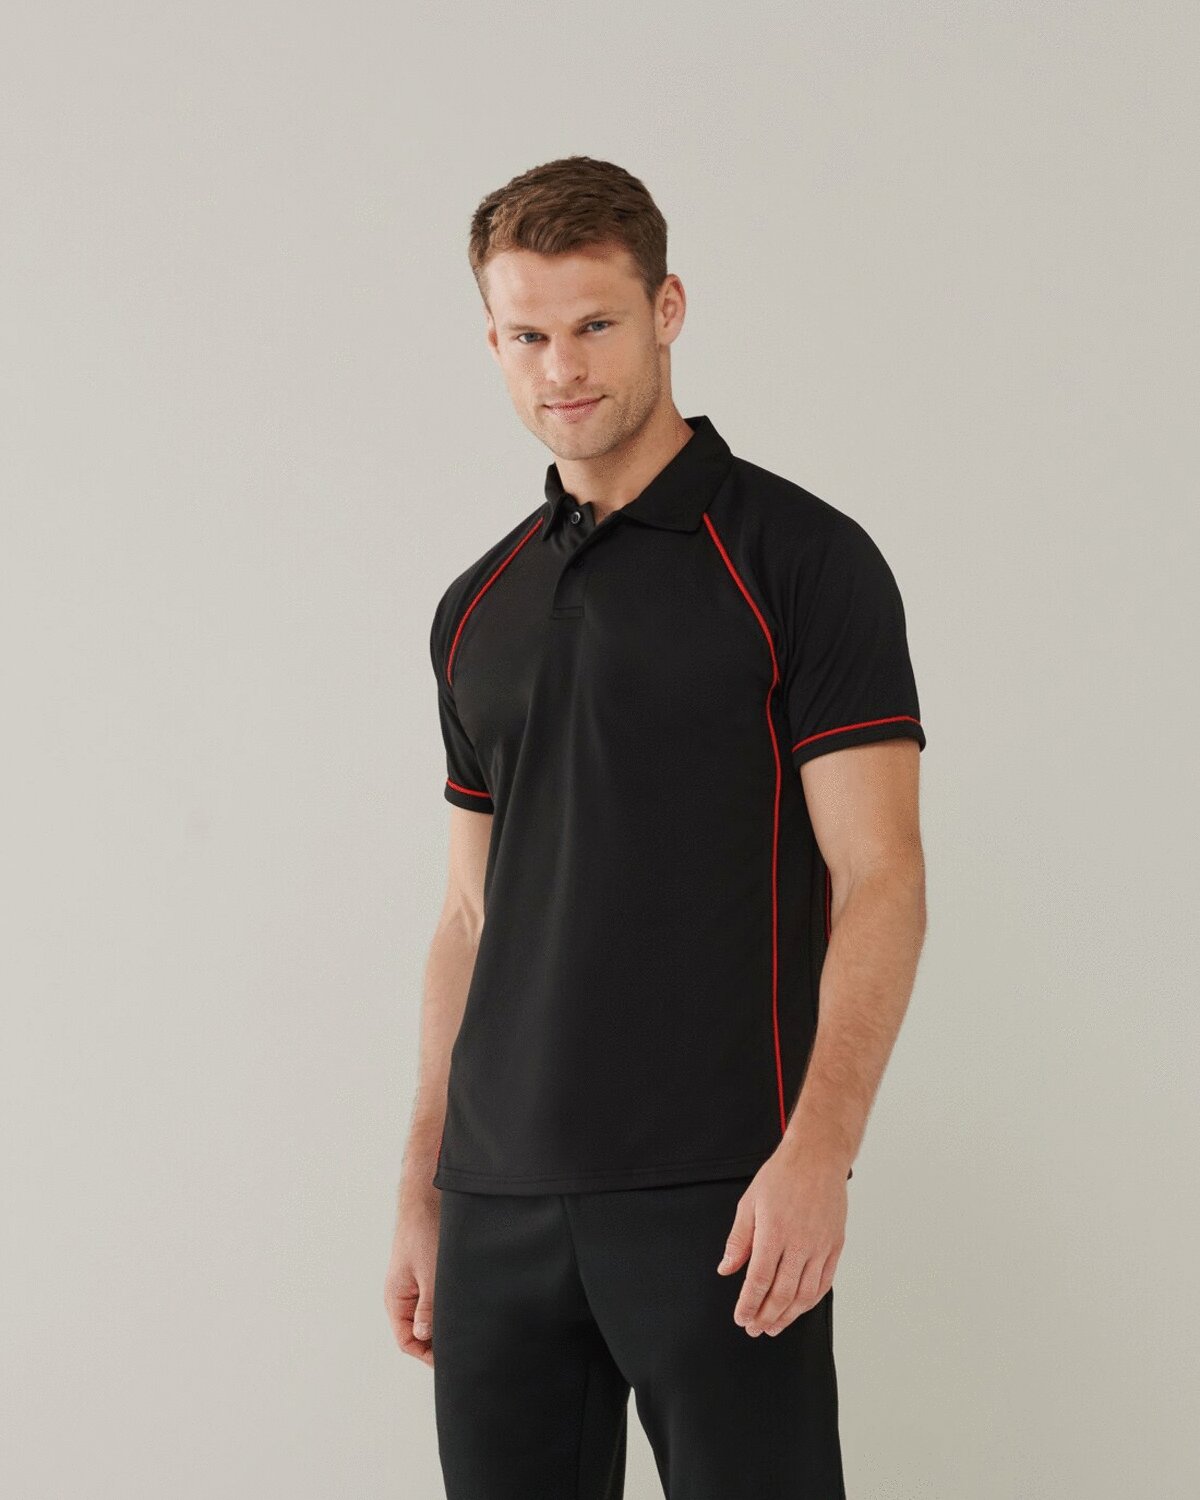 LV370M-PERFORMANCE PIPED POLO